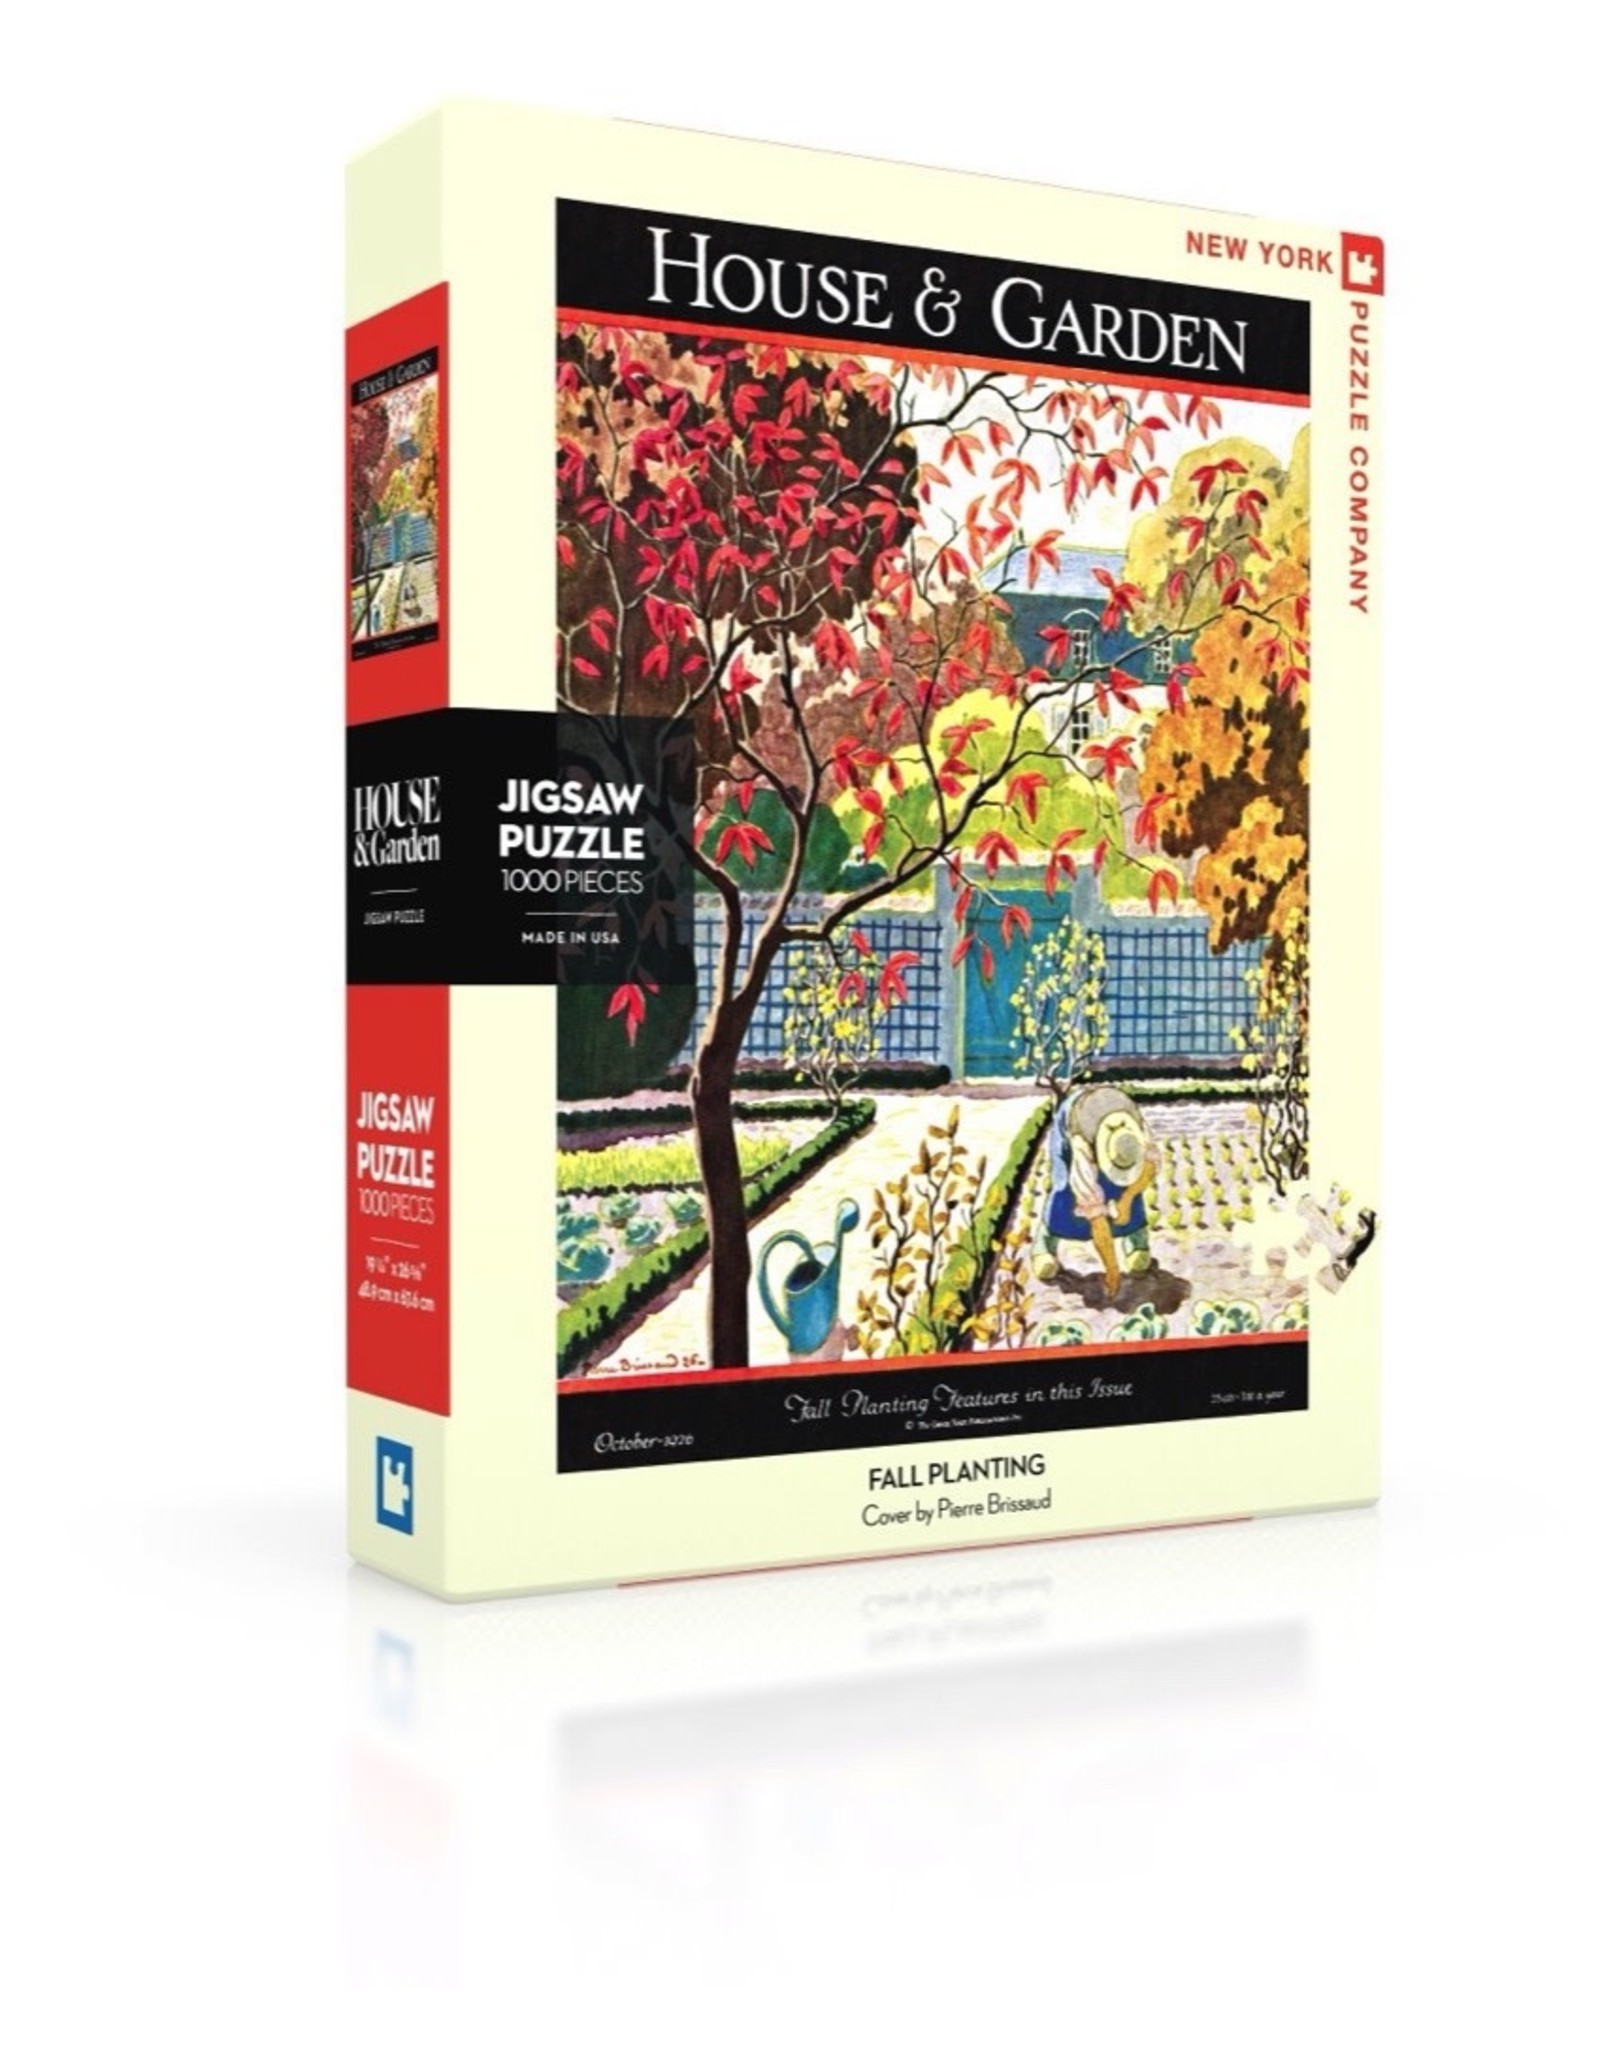 New York Puzzle Company Fall Planting 1000pc New York Puzzle Company Jigsaw Puzzle